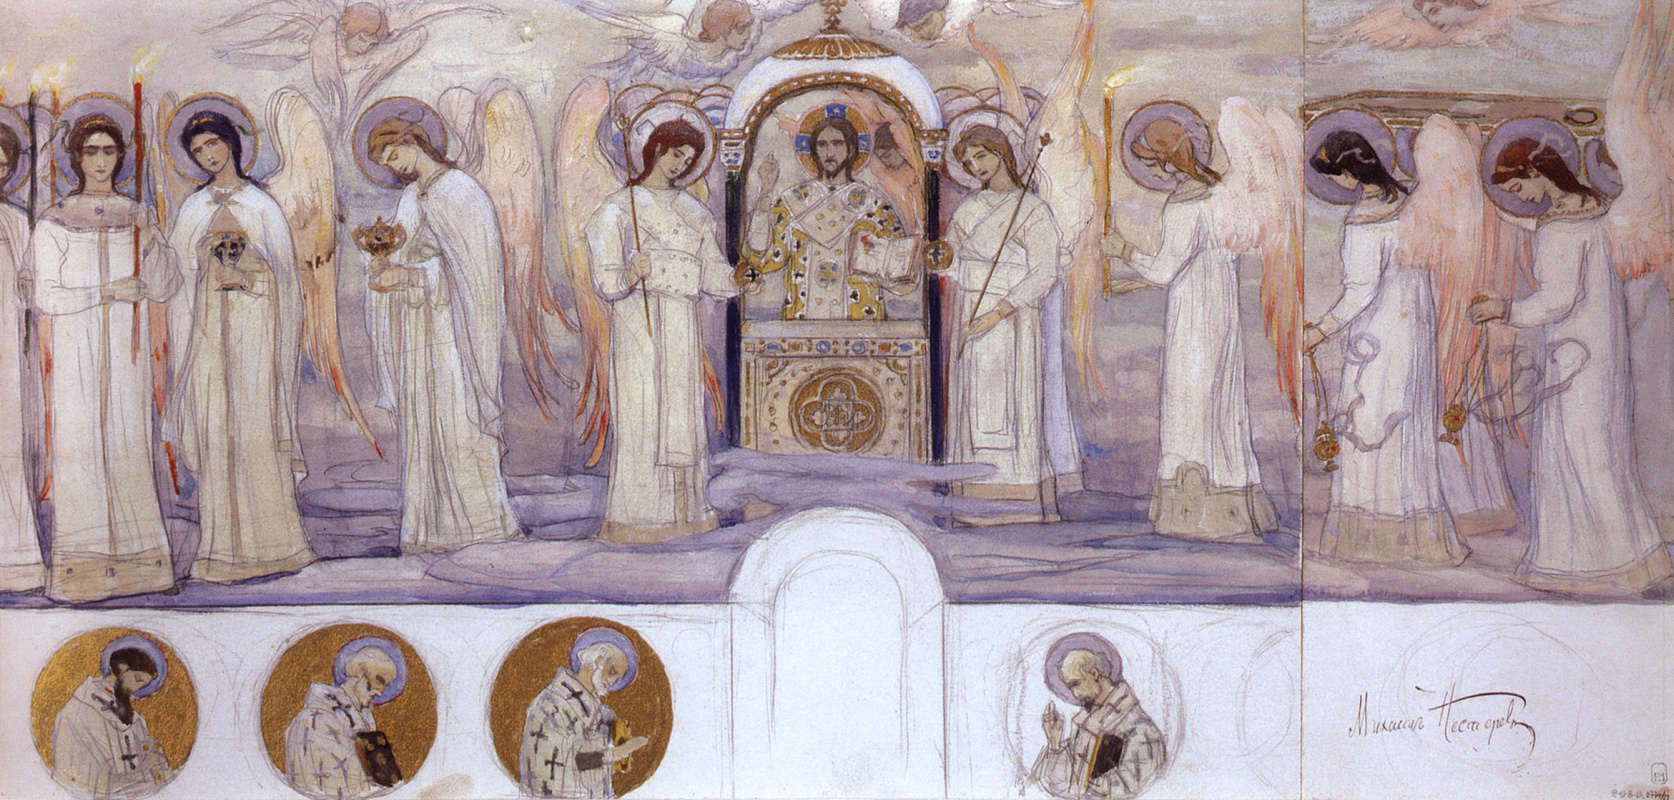 Mikhail Vasilyevich Nesterov. Liturgy of the angels. A sketch of the mural in the apse of the Church in the name of blagovernogo Prince Alexander Nevsky